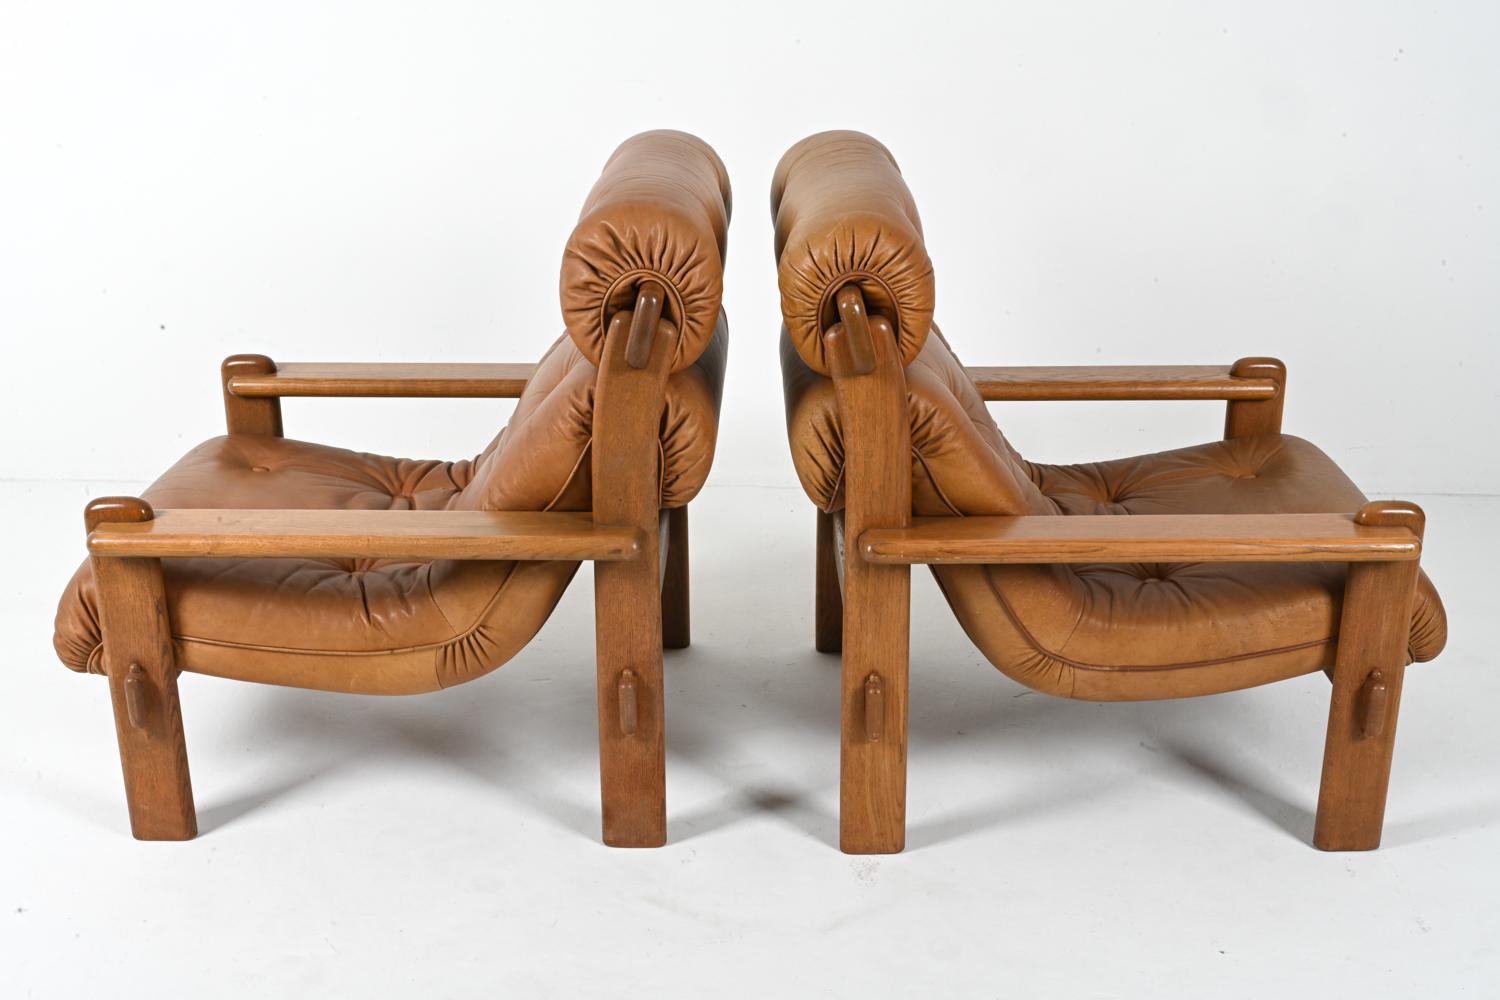 Pair of European Brutalist Armchairs in Oak & Leather, c. 1970's For Sale 7